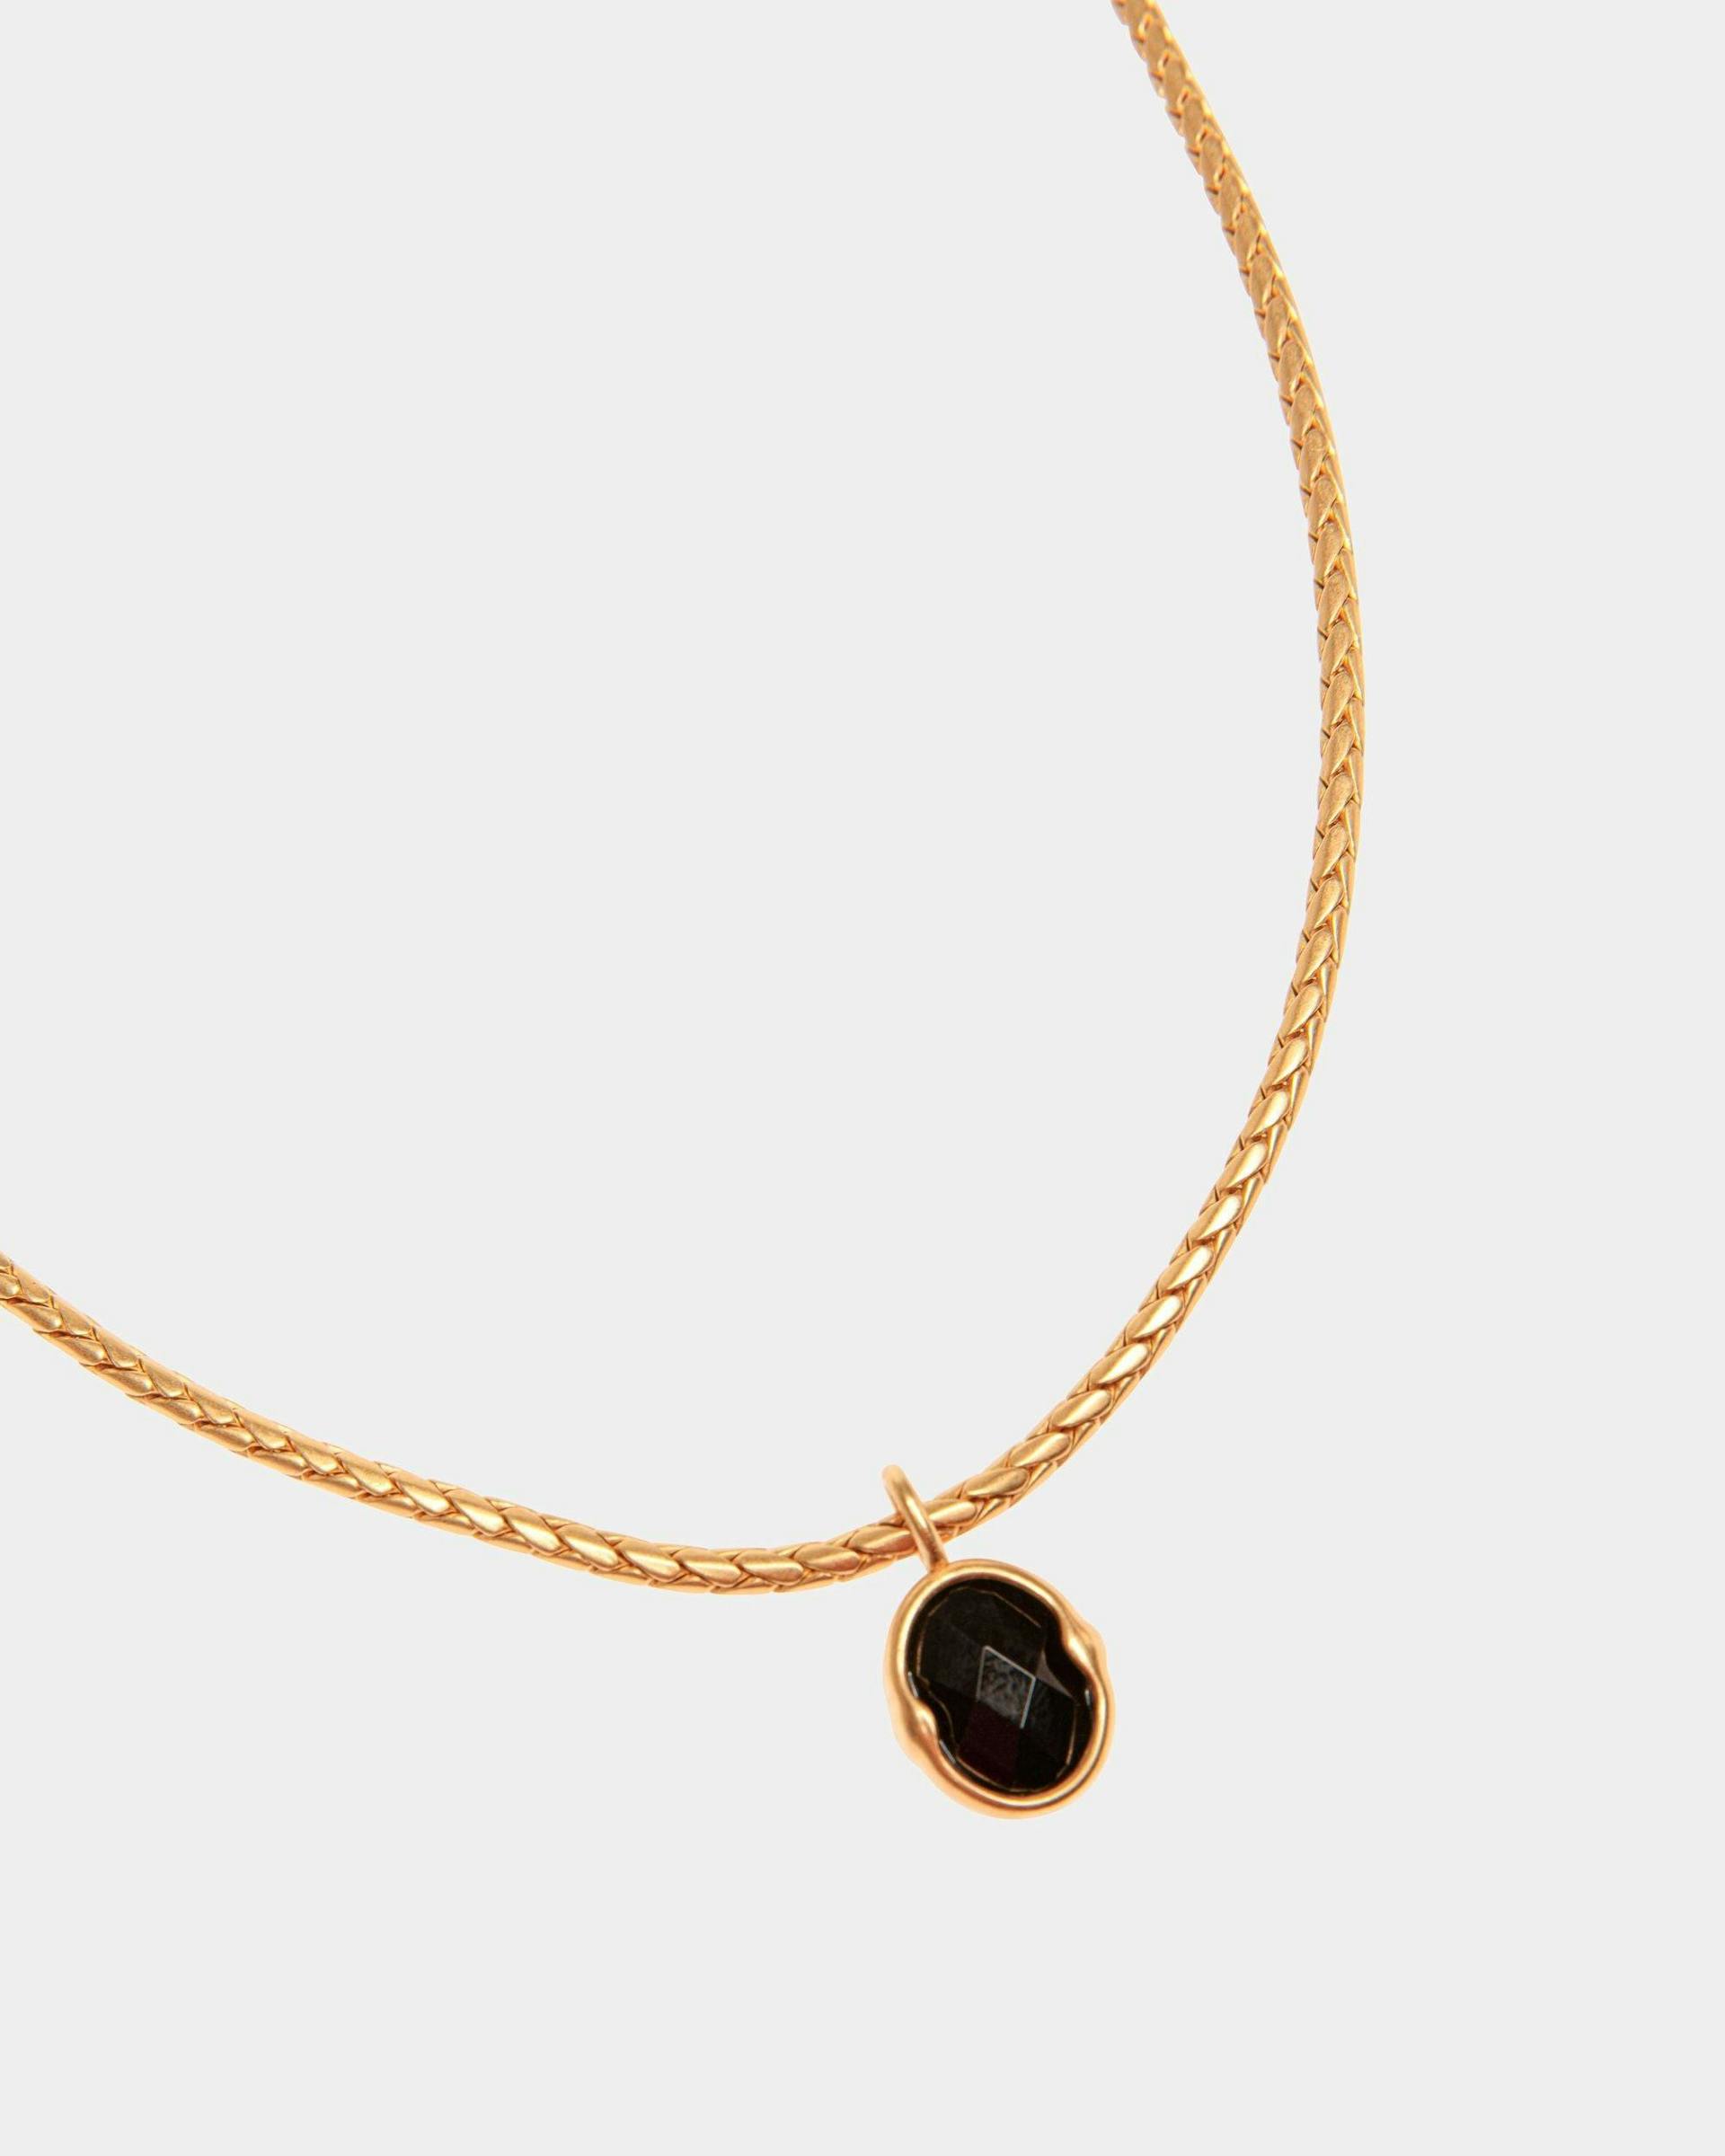 Women's Frame Outline Necklace With A Snake Chain | Bally | Still Life Detail